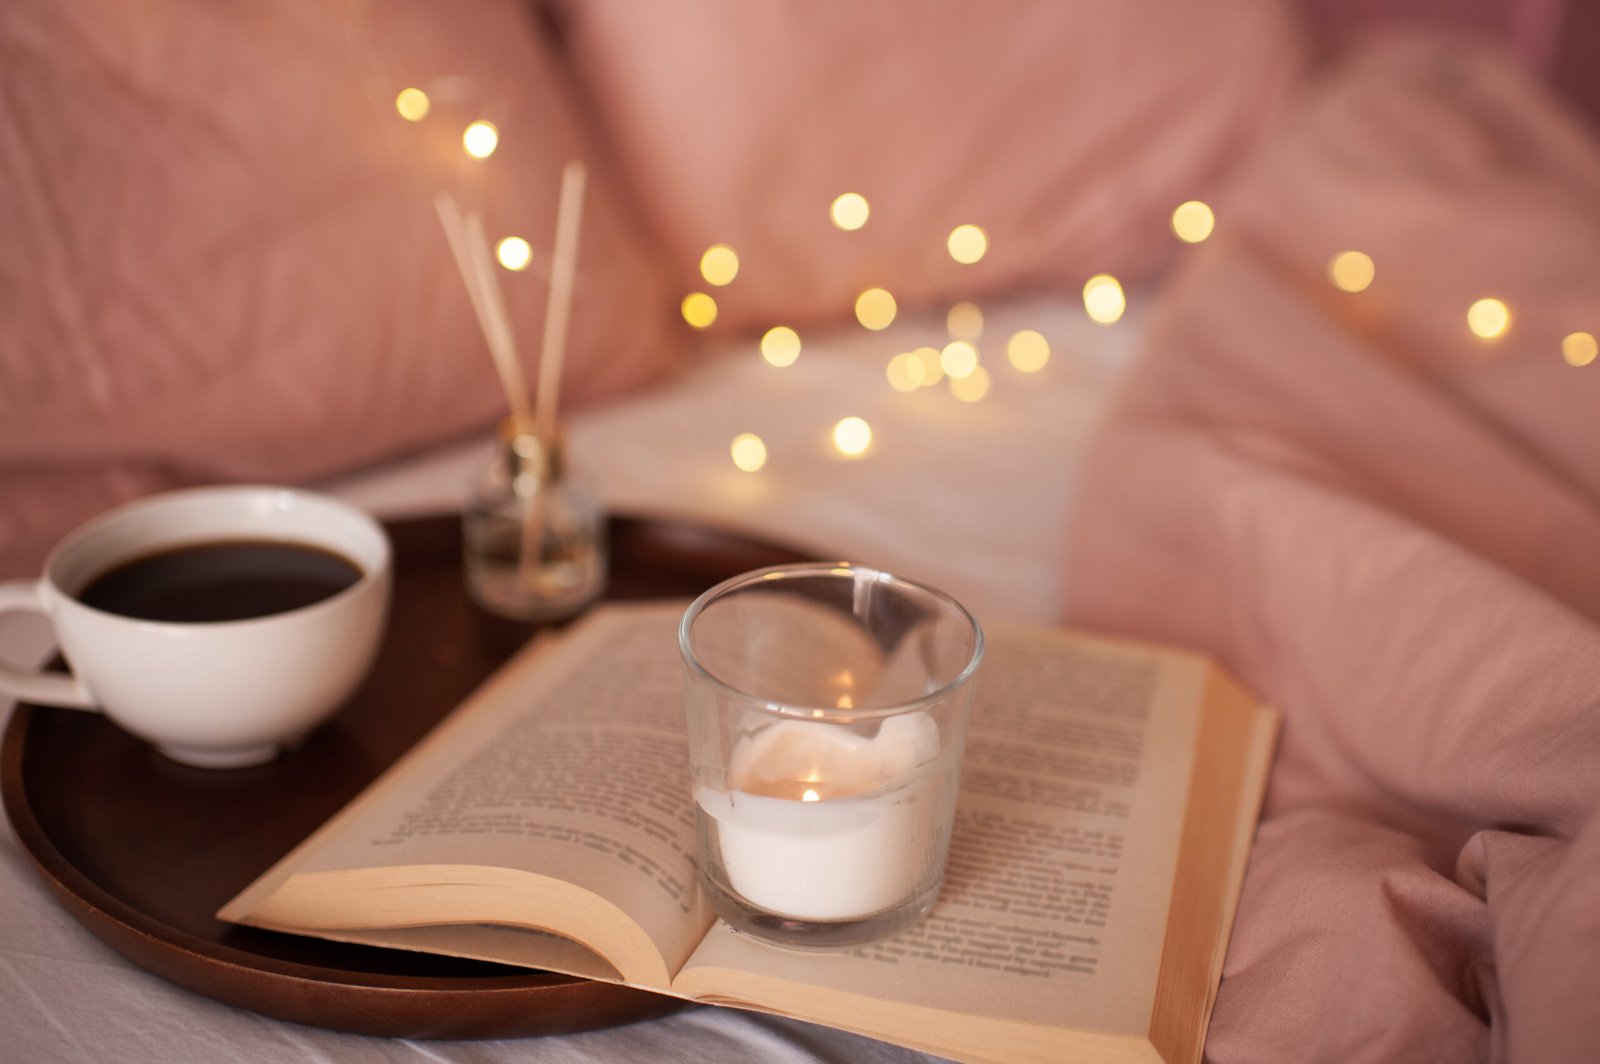 Burning candle staying on open paper book and cup of tea with aroma sticks at background over glowing lights. Cozy atmosphere concept. 